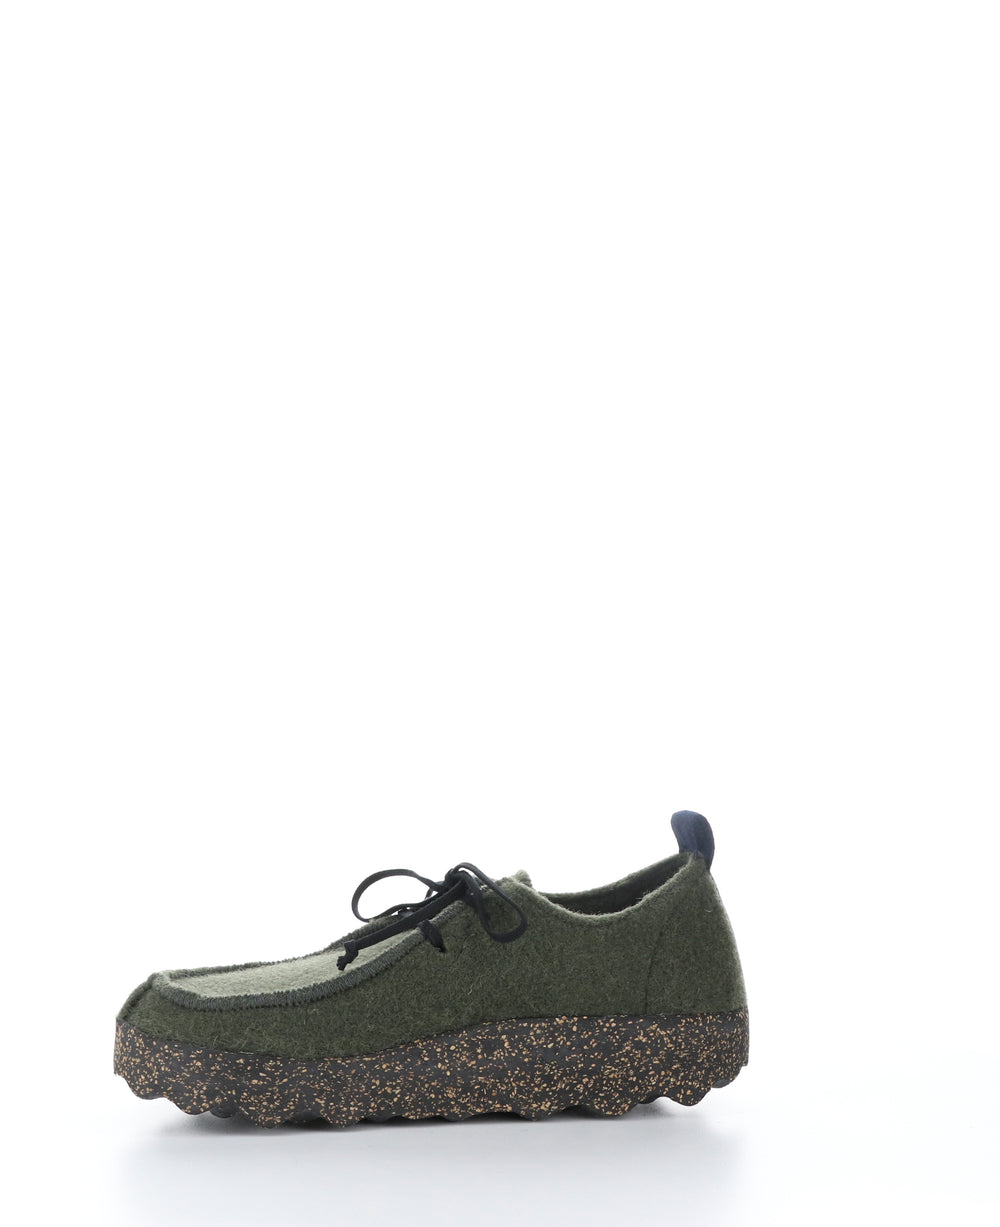 CHAT063ASP Military Green Round Toe Shoes|CHAT063ASP Chaussures à Bout Rond in Vert